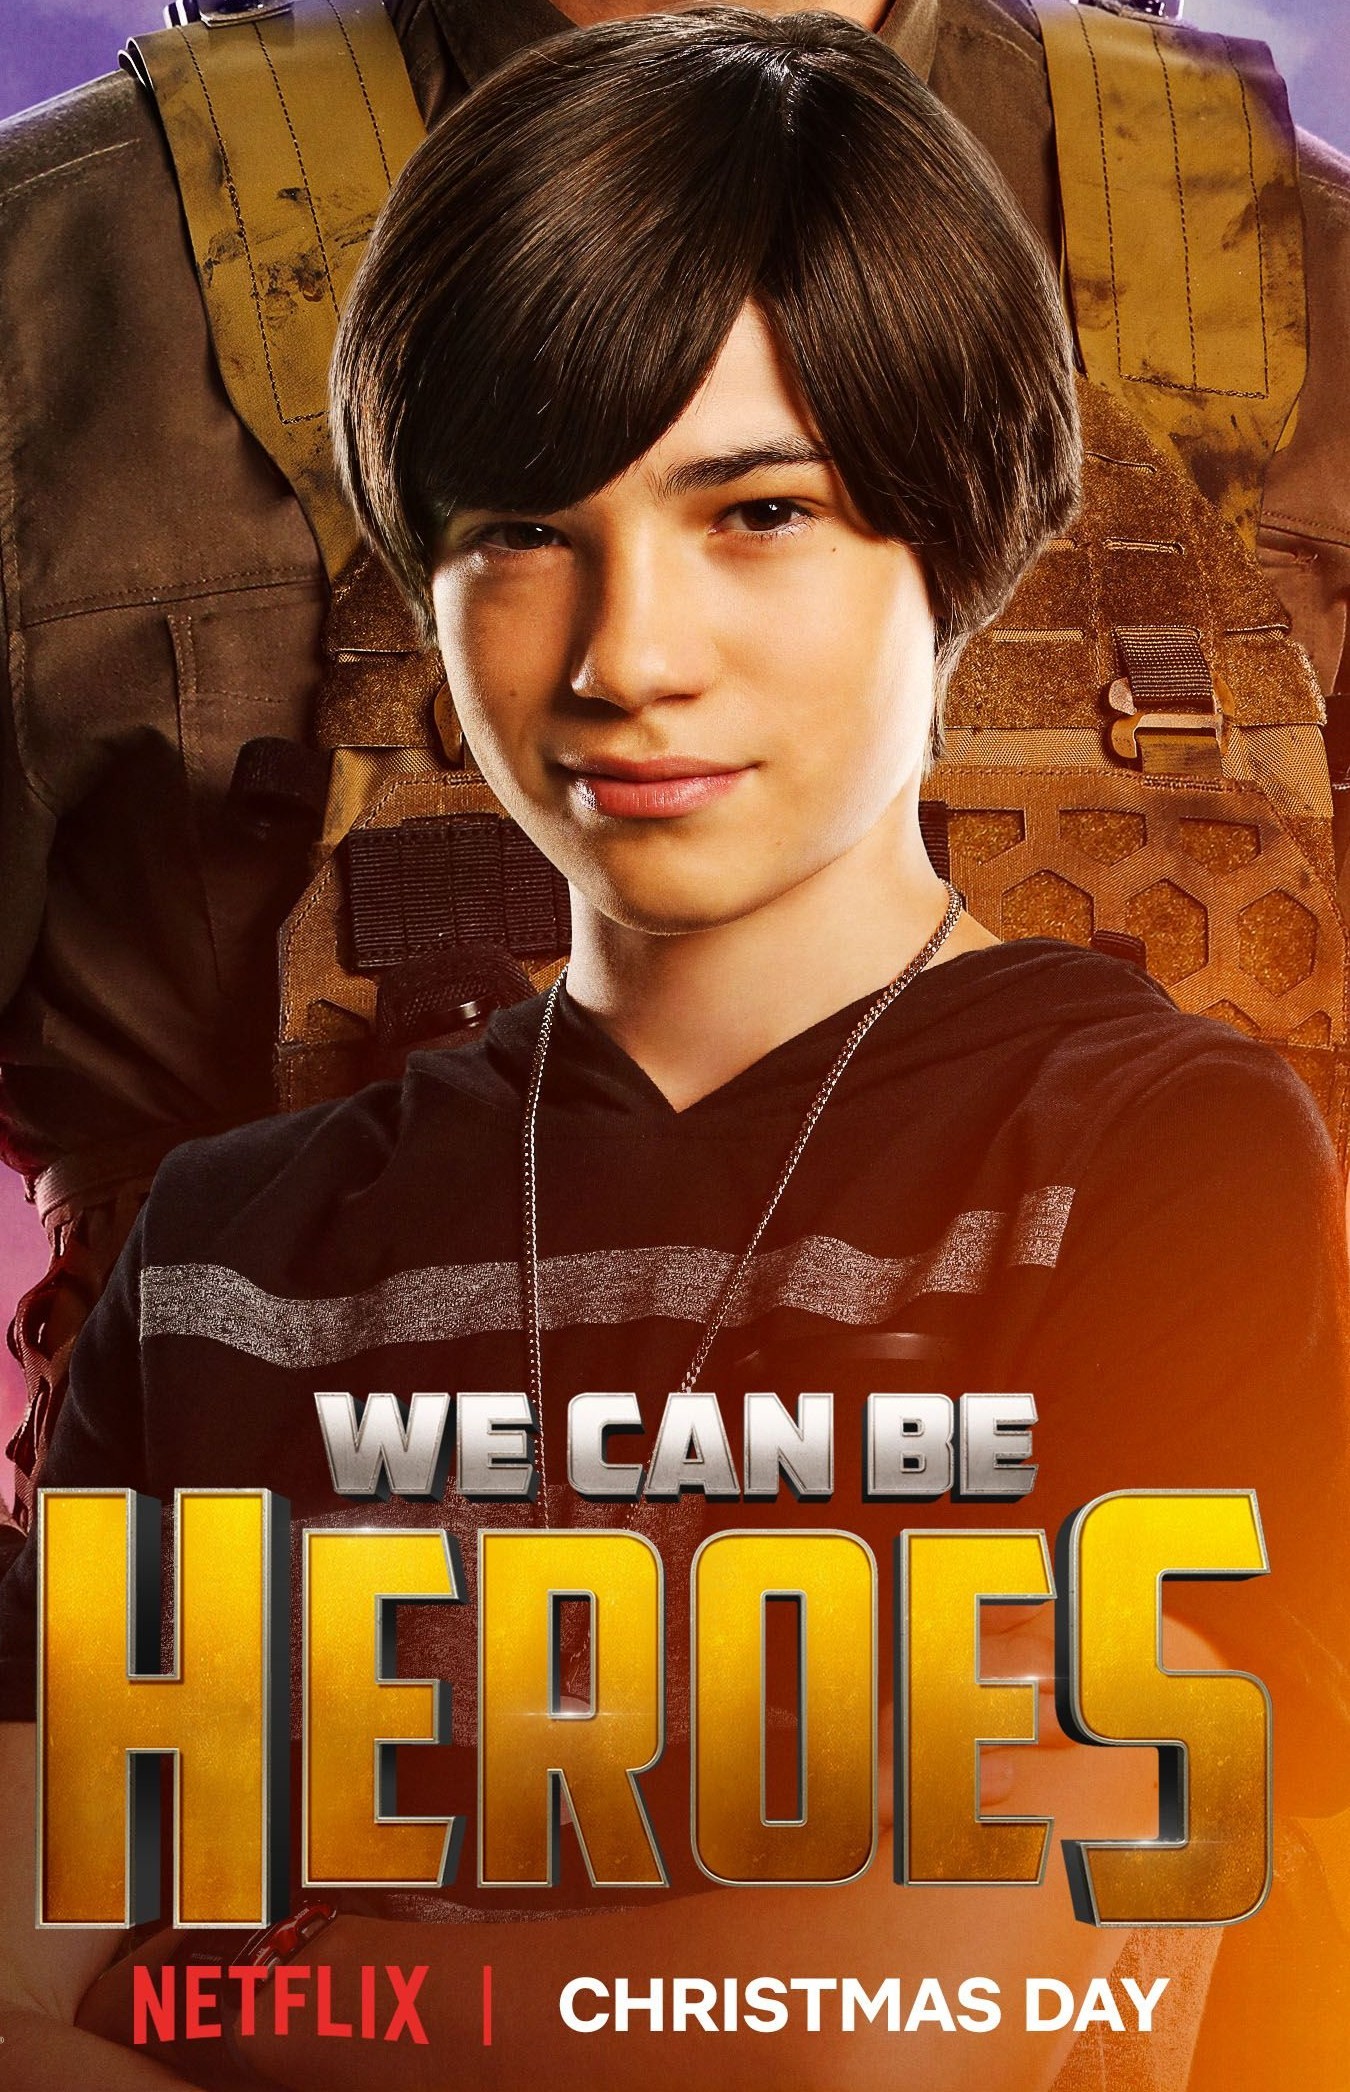 Nathan Blair in We Can Be Heroes